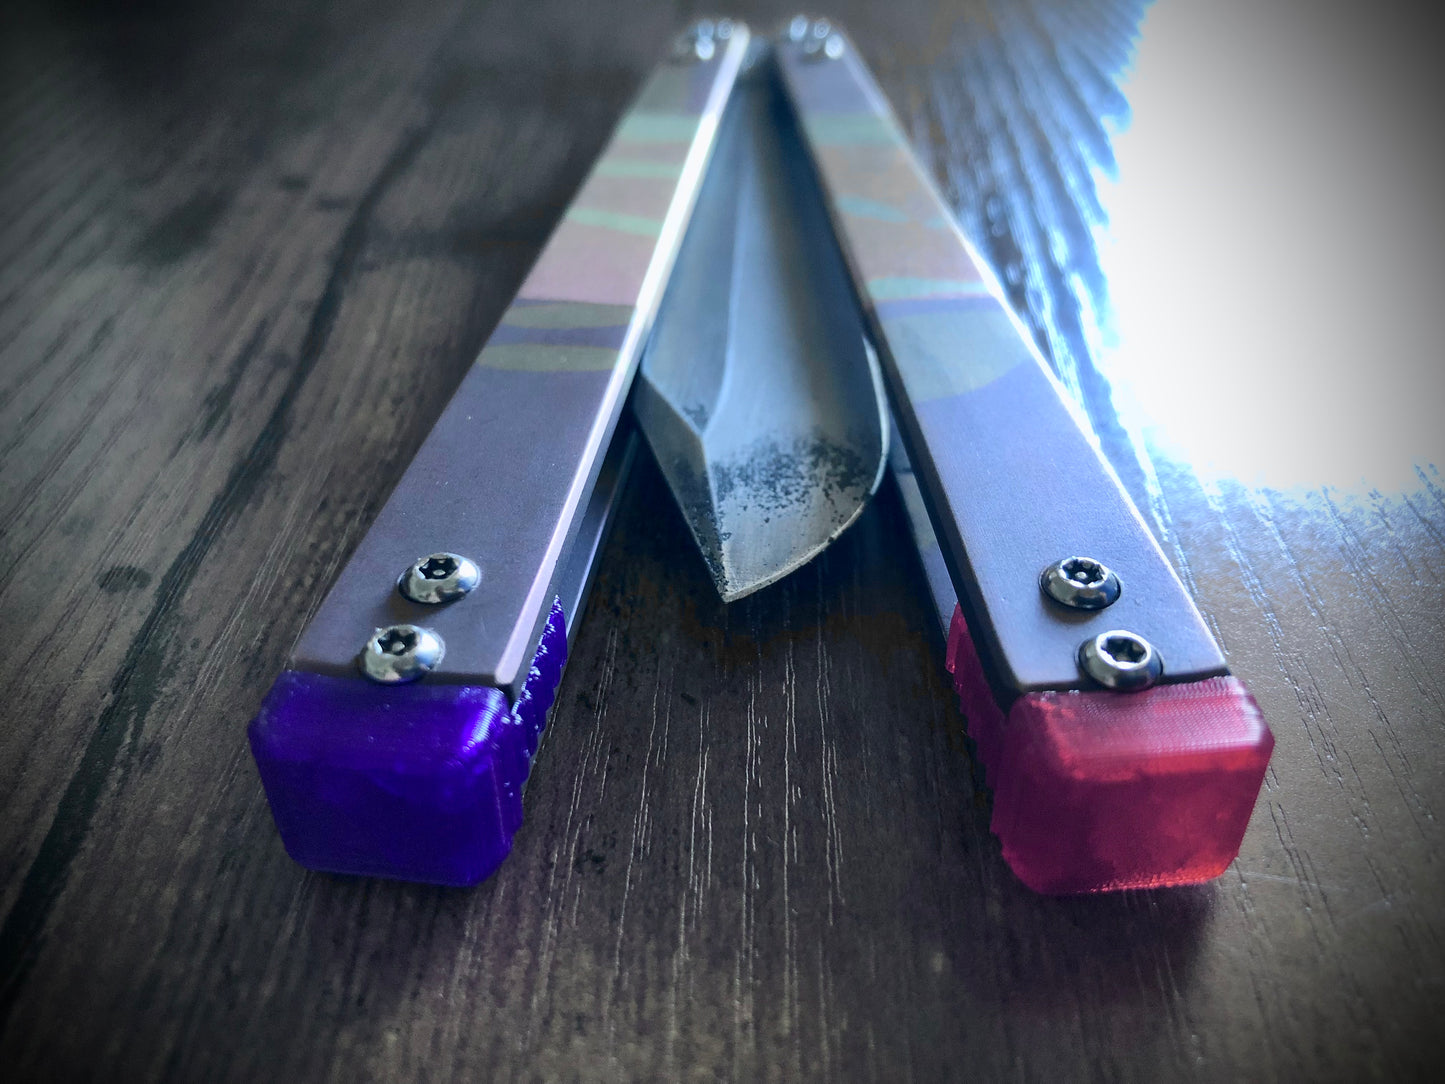 Adjust the balance and protect your Atropos balisong handles from concrete drops with these Zippy spacers for the Atropos Bro and Atropos Spy balisong. Improve your flipping with your Atropos Kirat or Atropos Demon with these extension spacers featuring positive jimping.